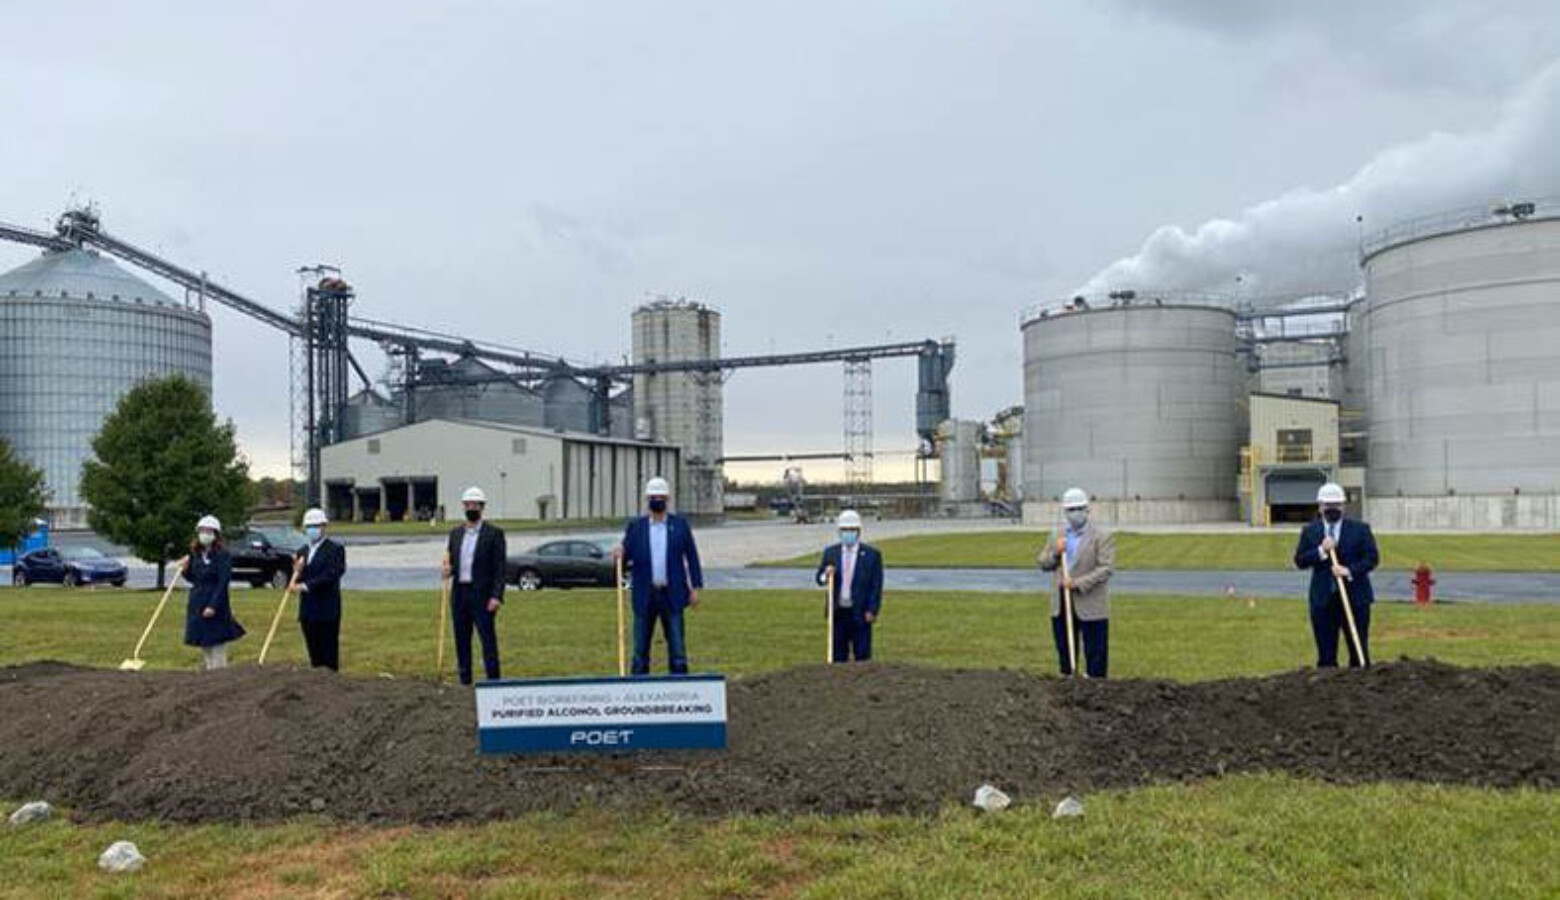 Officials break ground at POET Biorefining's Alexandria facility. The upgrades at the Indiana location will allow the company to produce ethanol that's FDA approved for hand sanitizer. (Courtesy of POET)